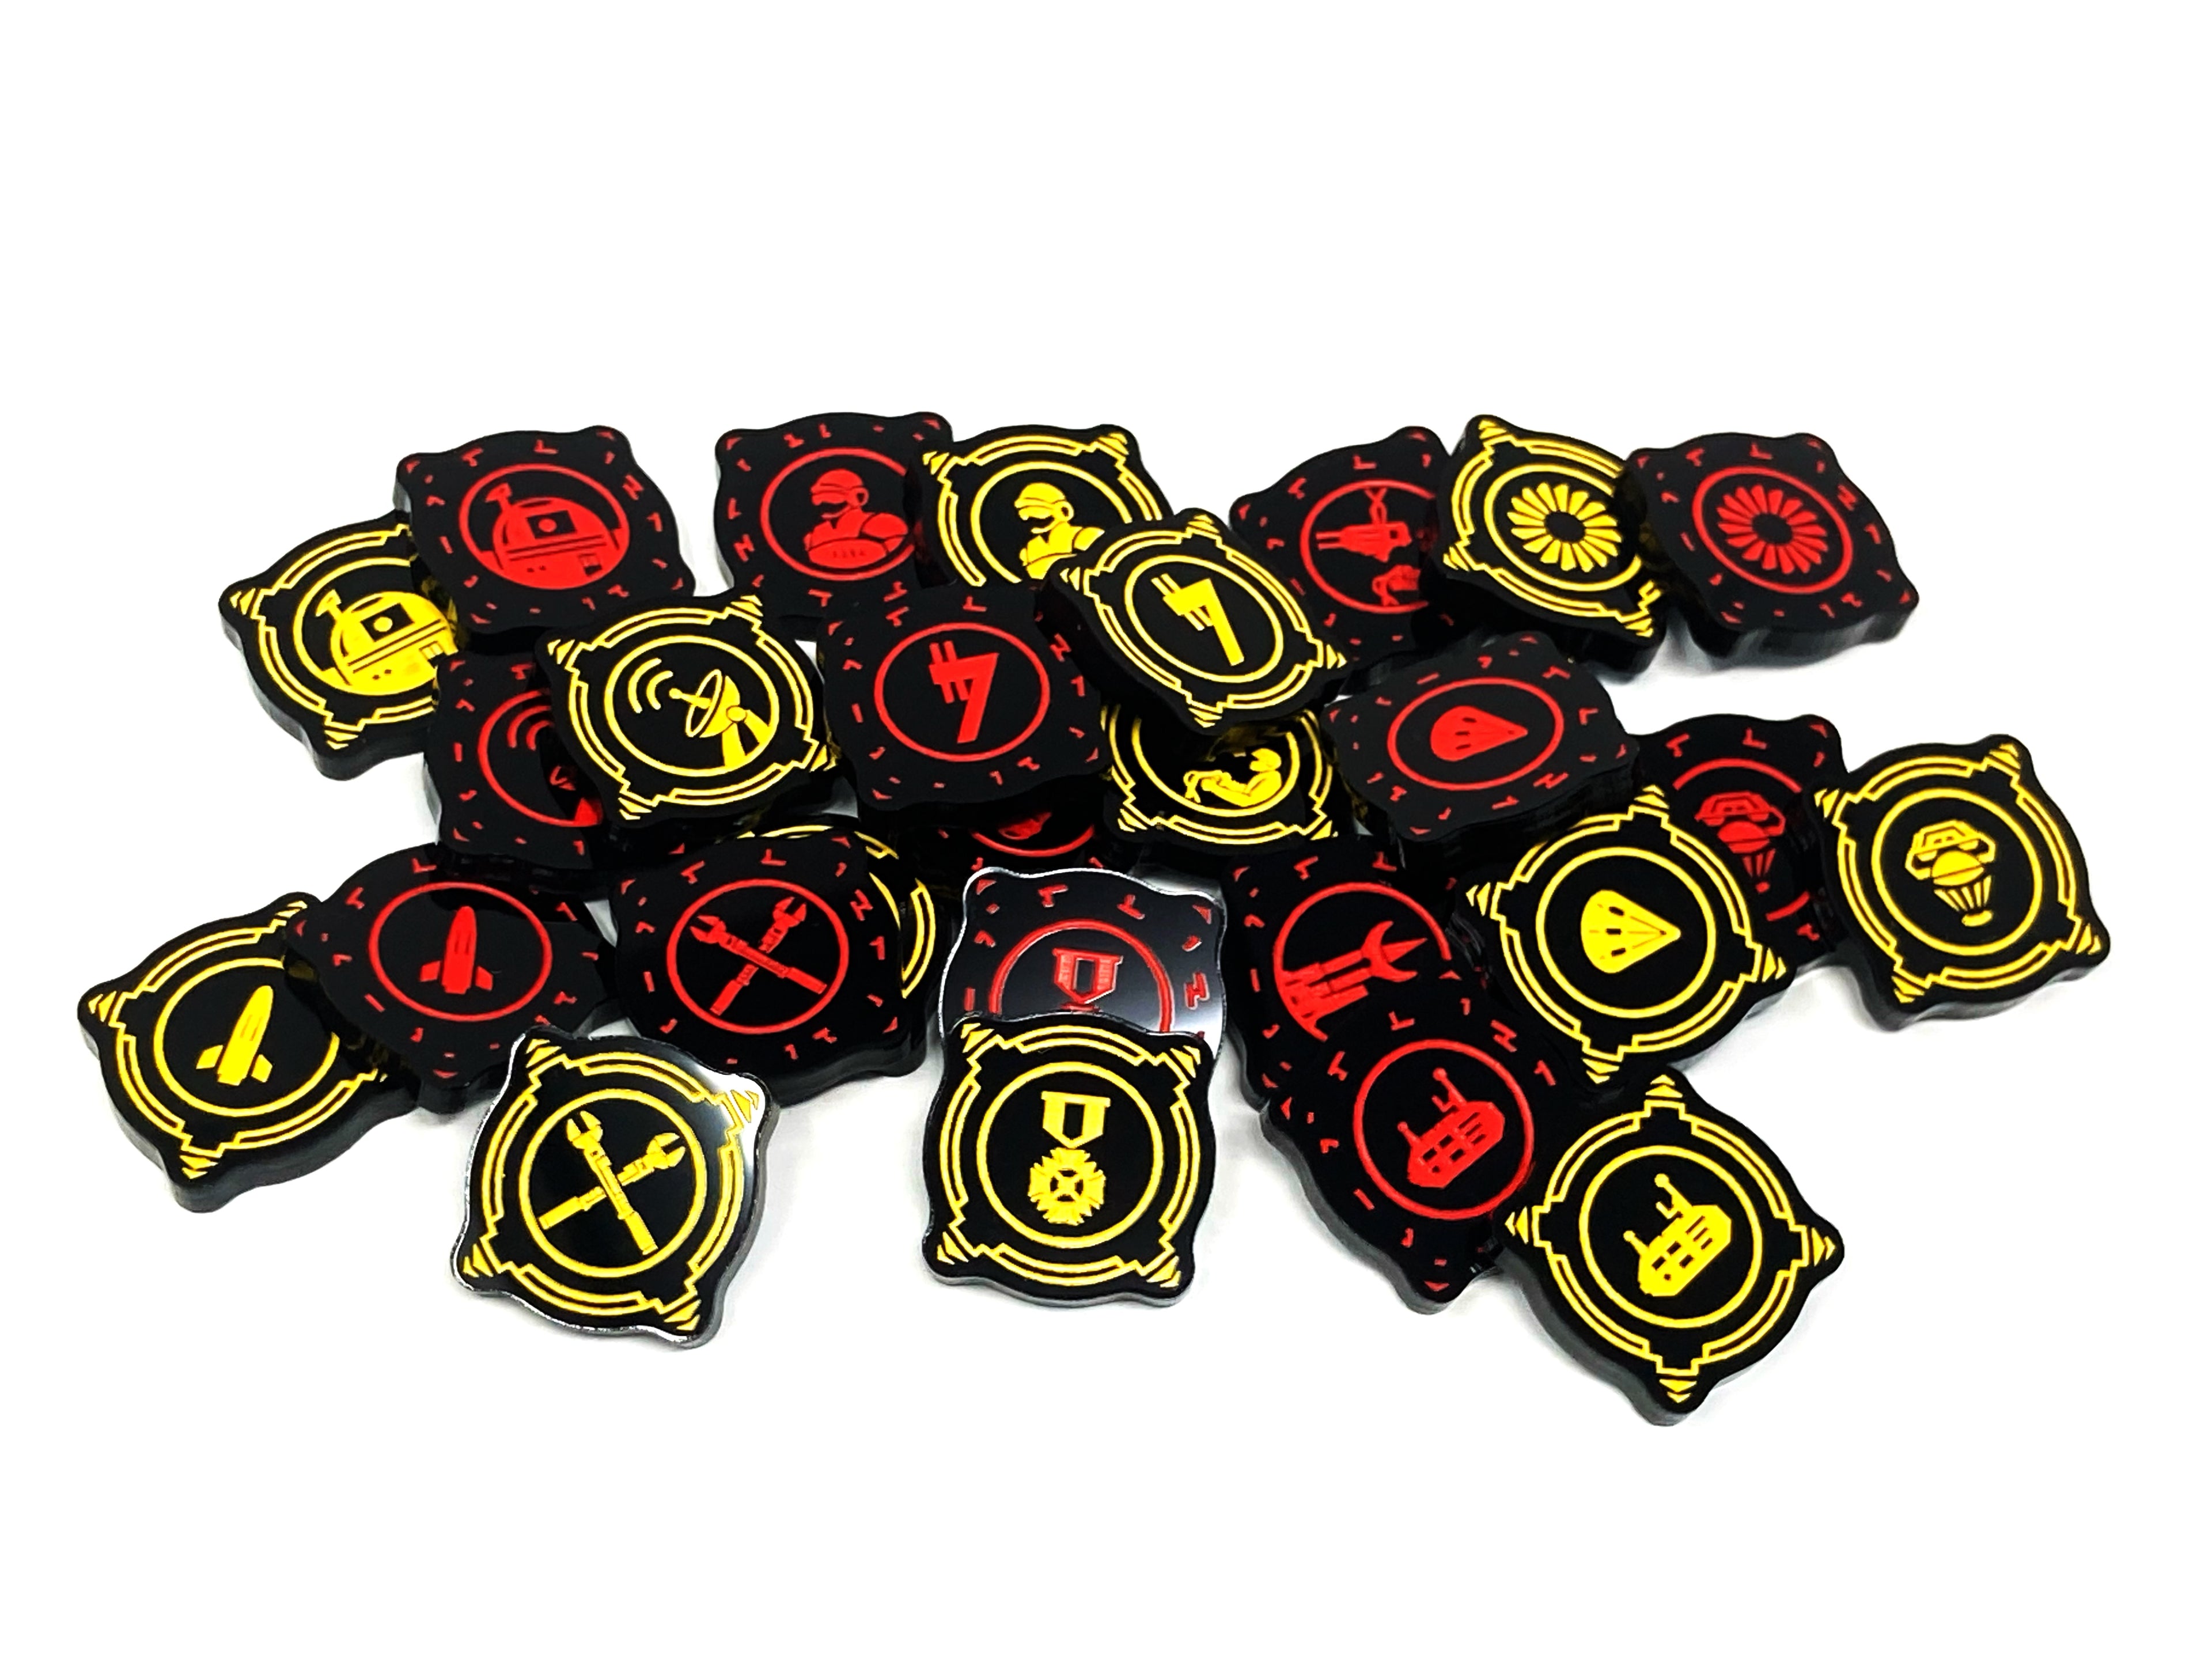 2 x Sensor Charge Tokens - Black Series (Double Sided)